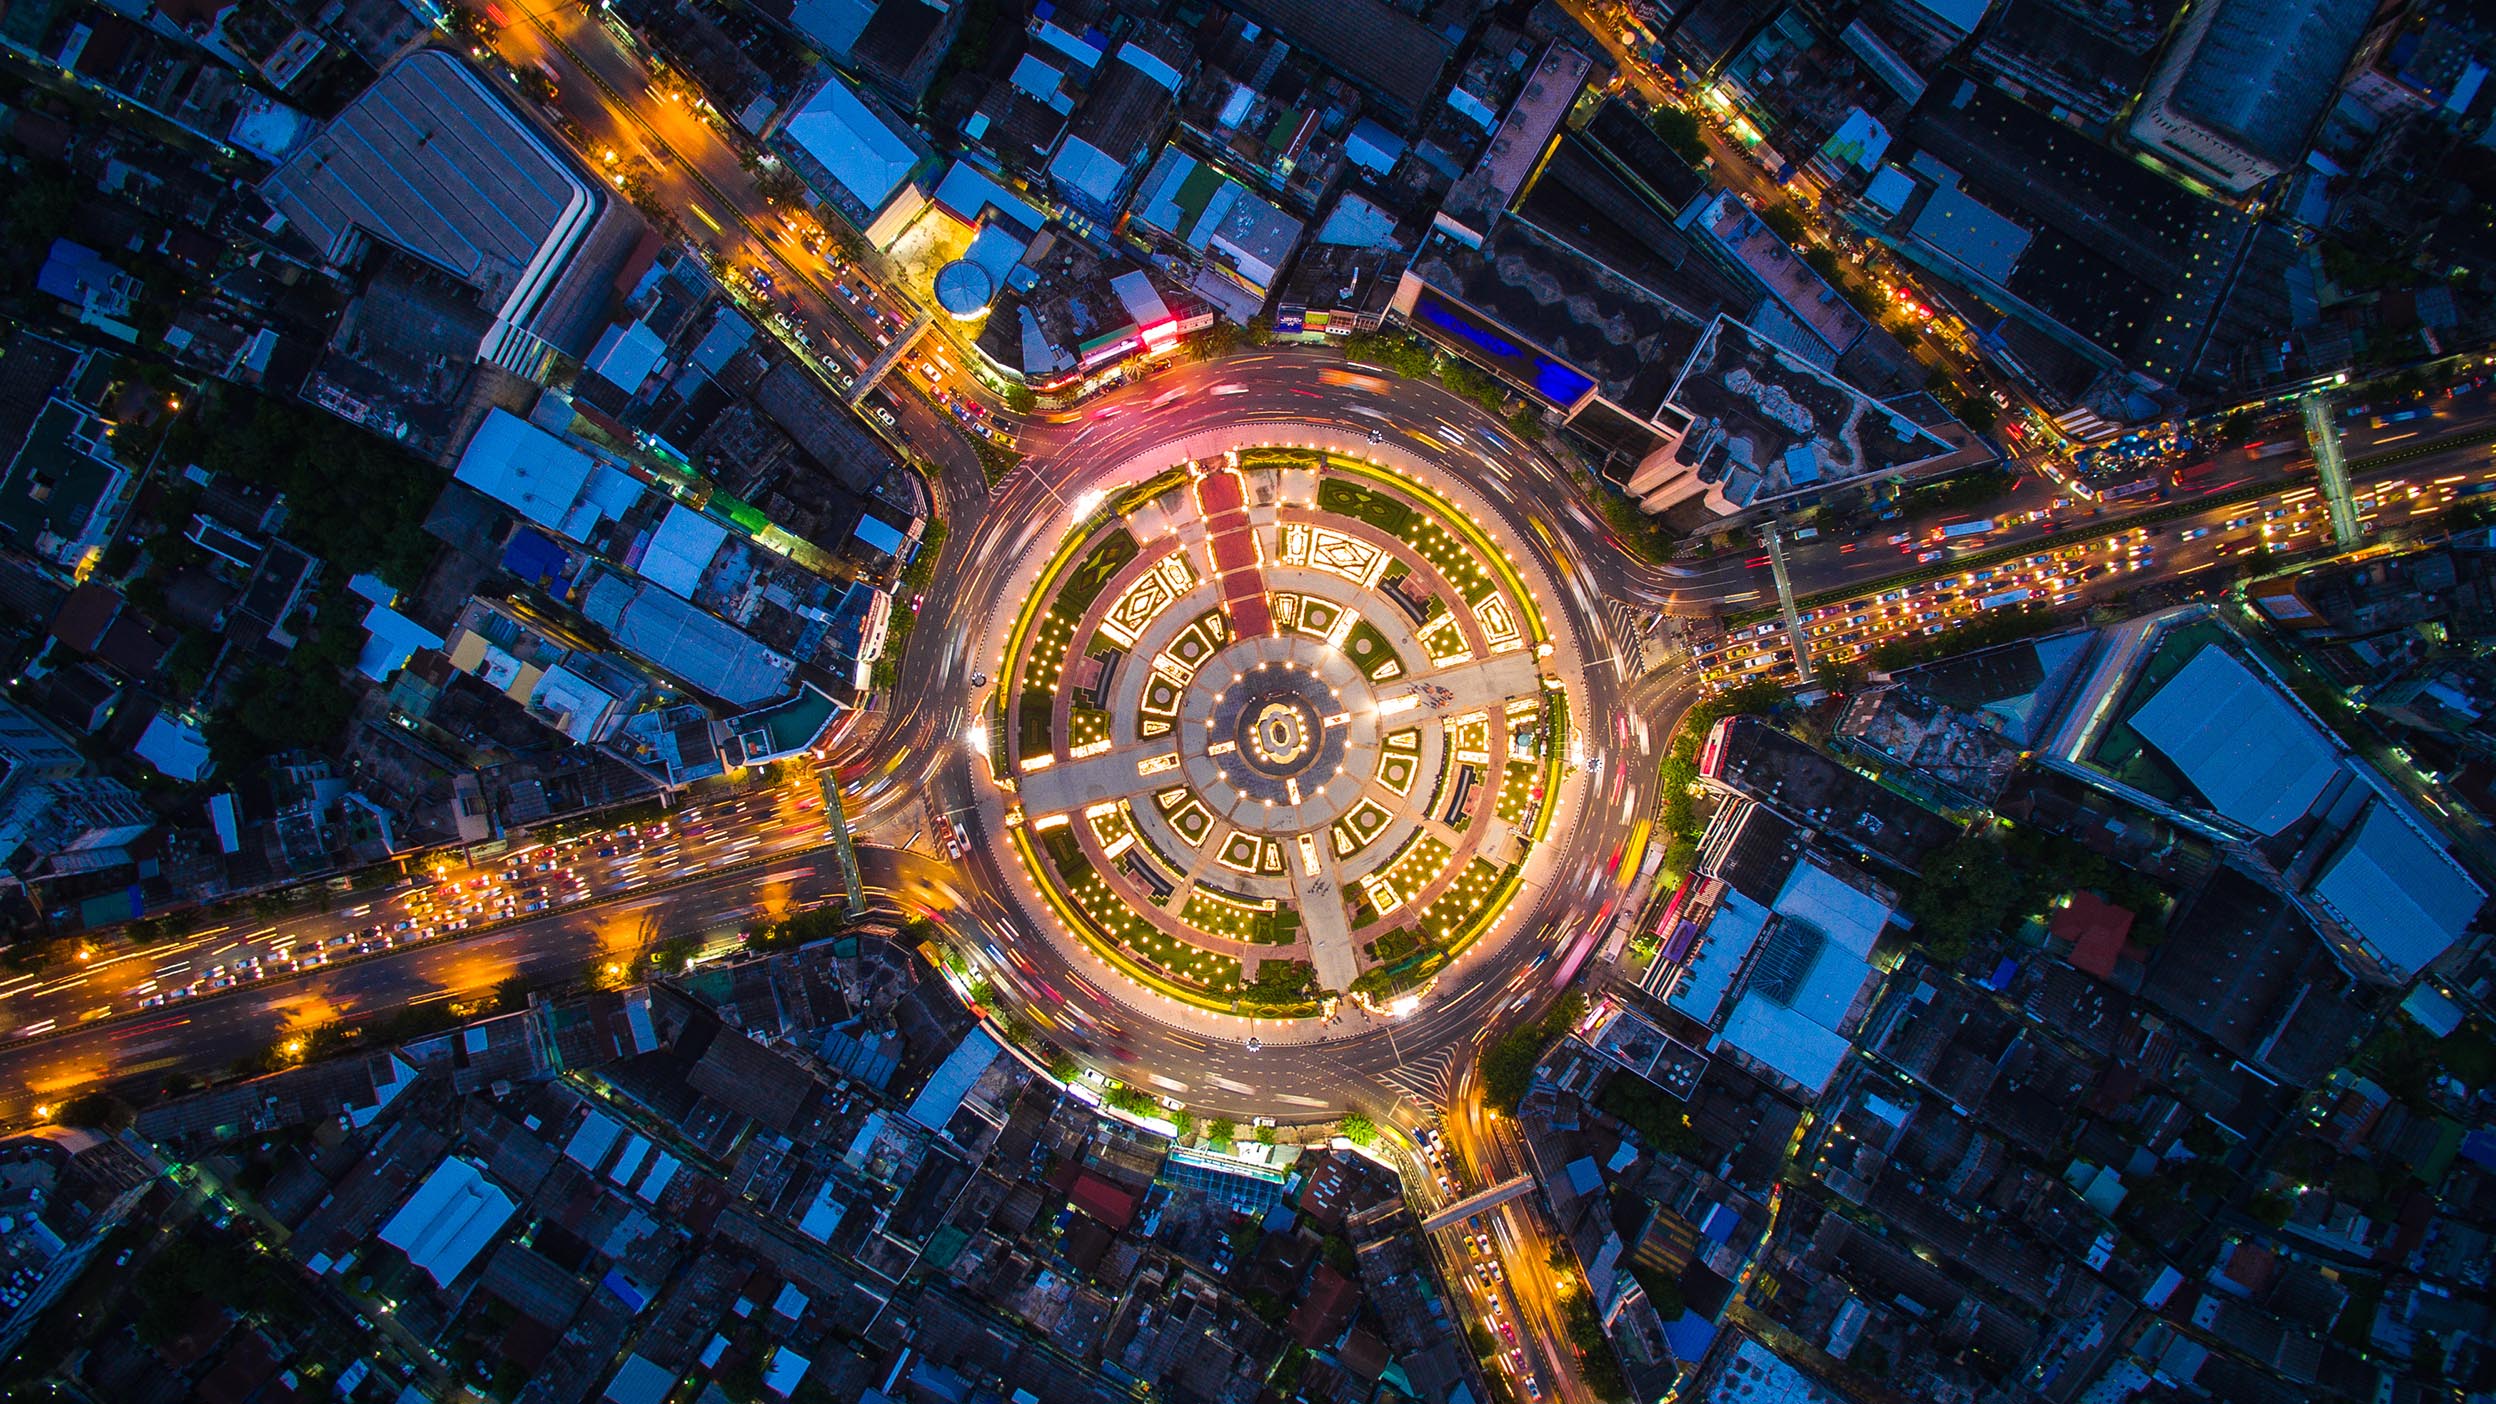 Large roundabout traffic circle photographed from above at night.